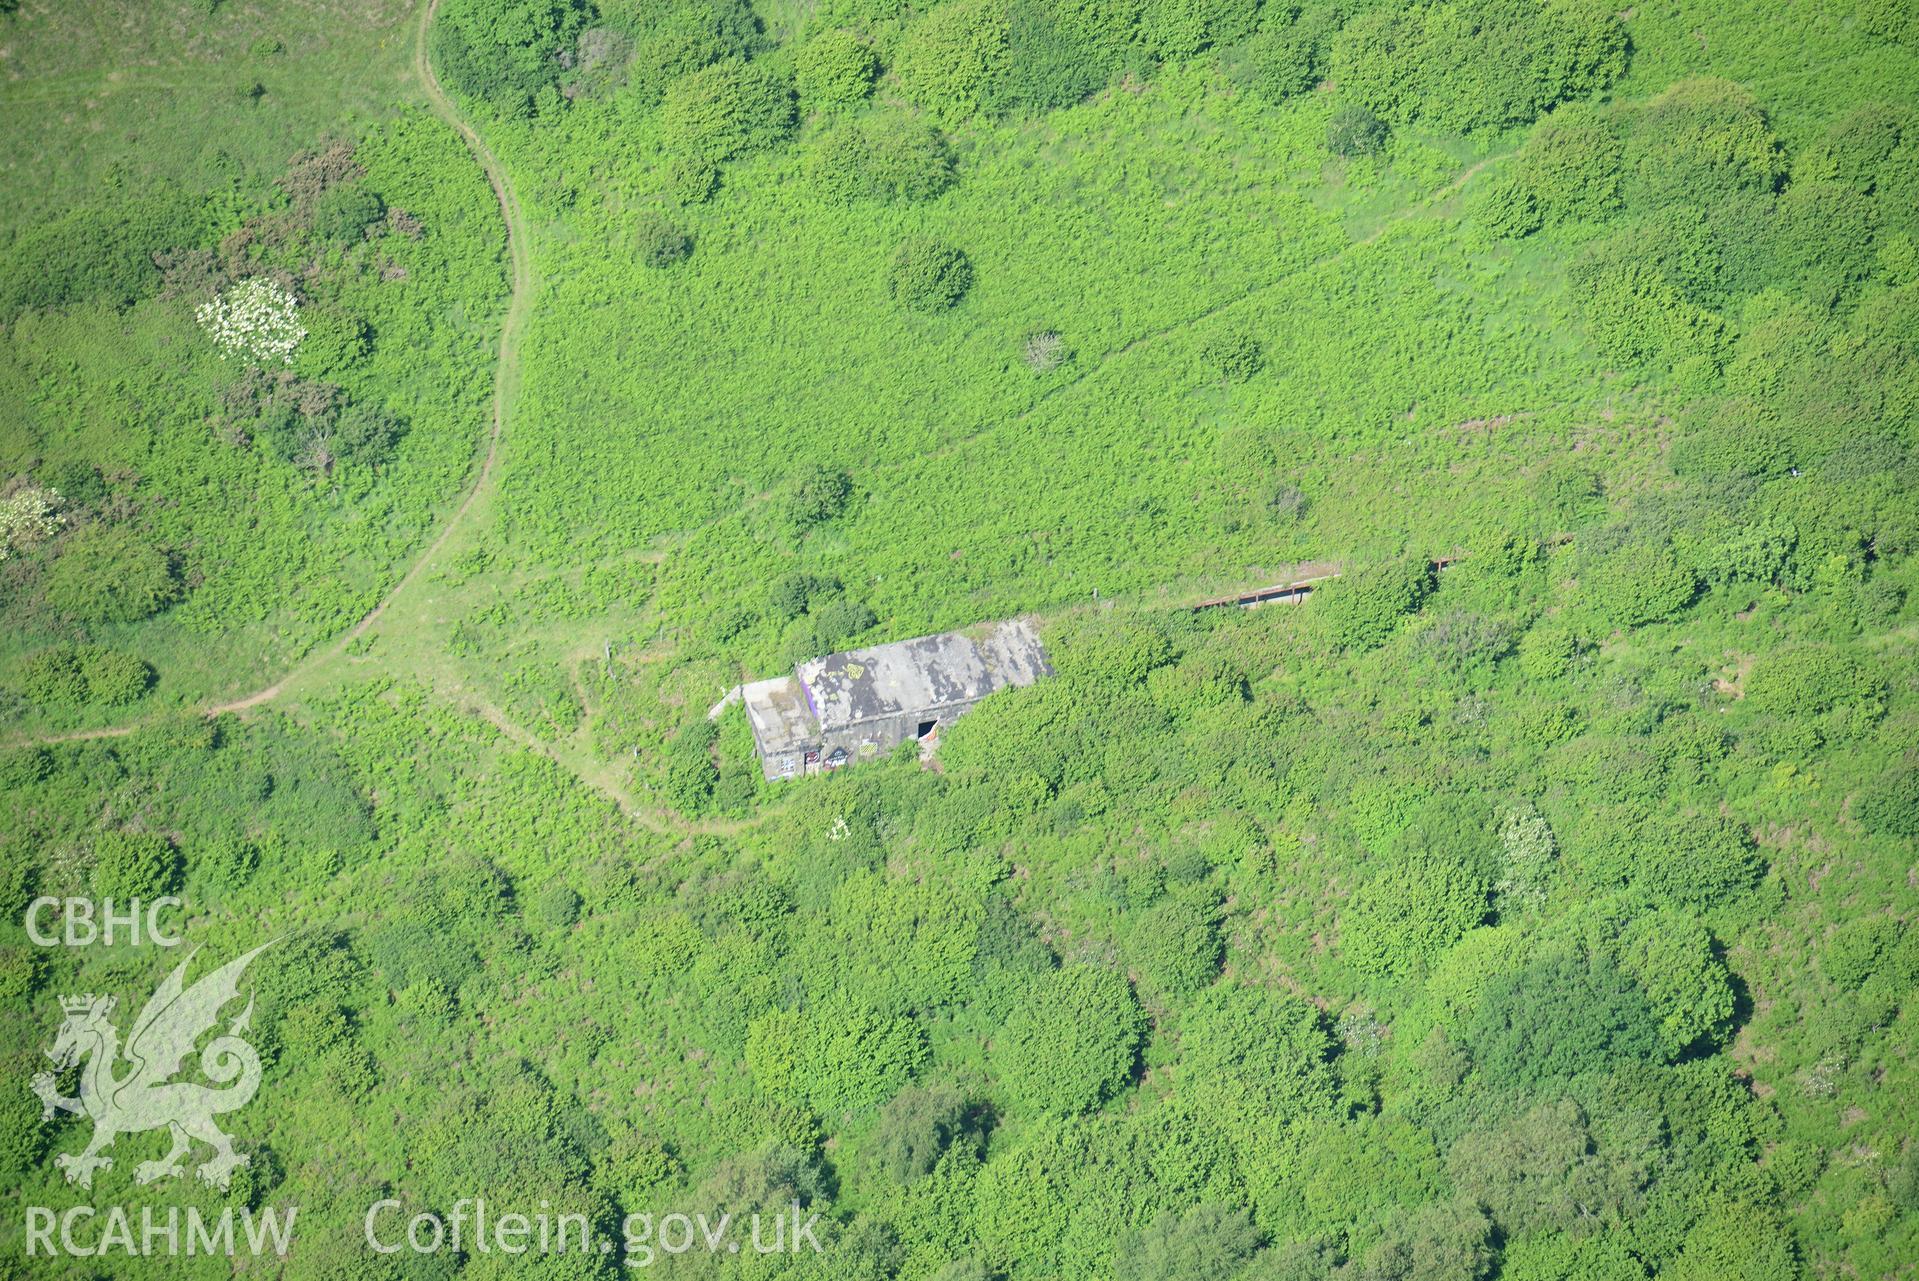 Merthyr Mawr Warren and a ruined building at Wig Fach Firing Range 2. Oblique aerial photograph taken during the Royal Commission's programme of archaeological aerial reconnaissance by Toby Driver on 19th June 2015.